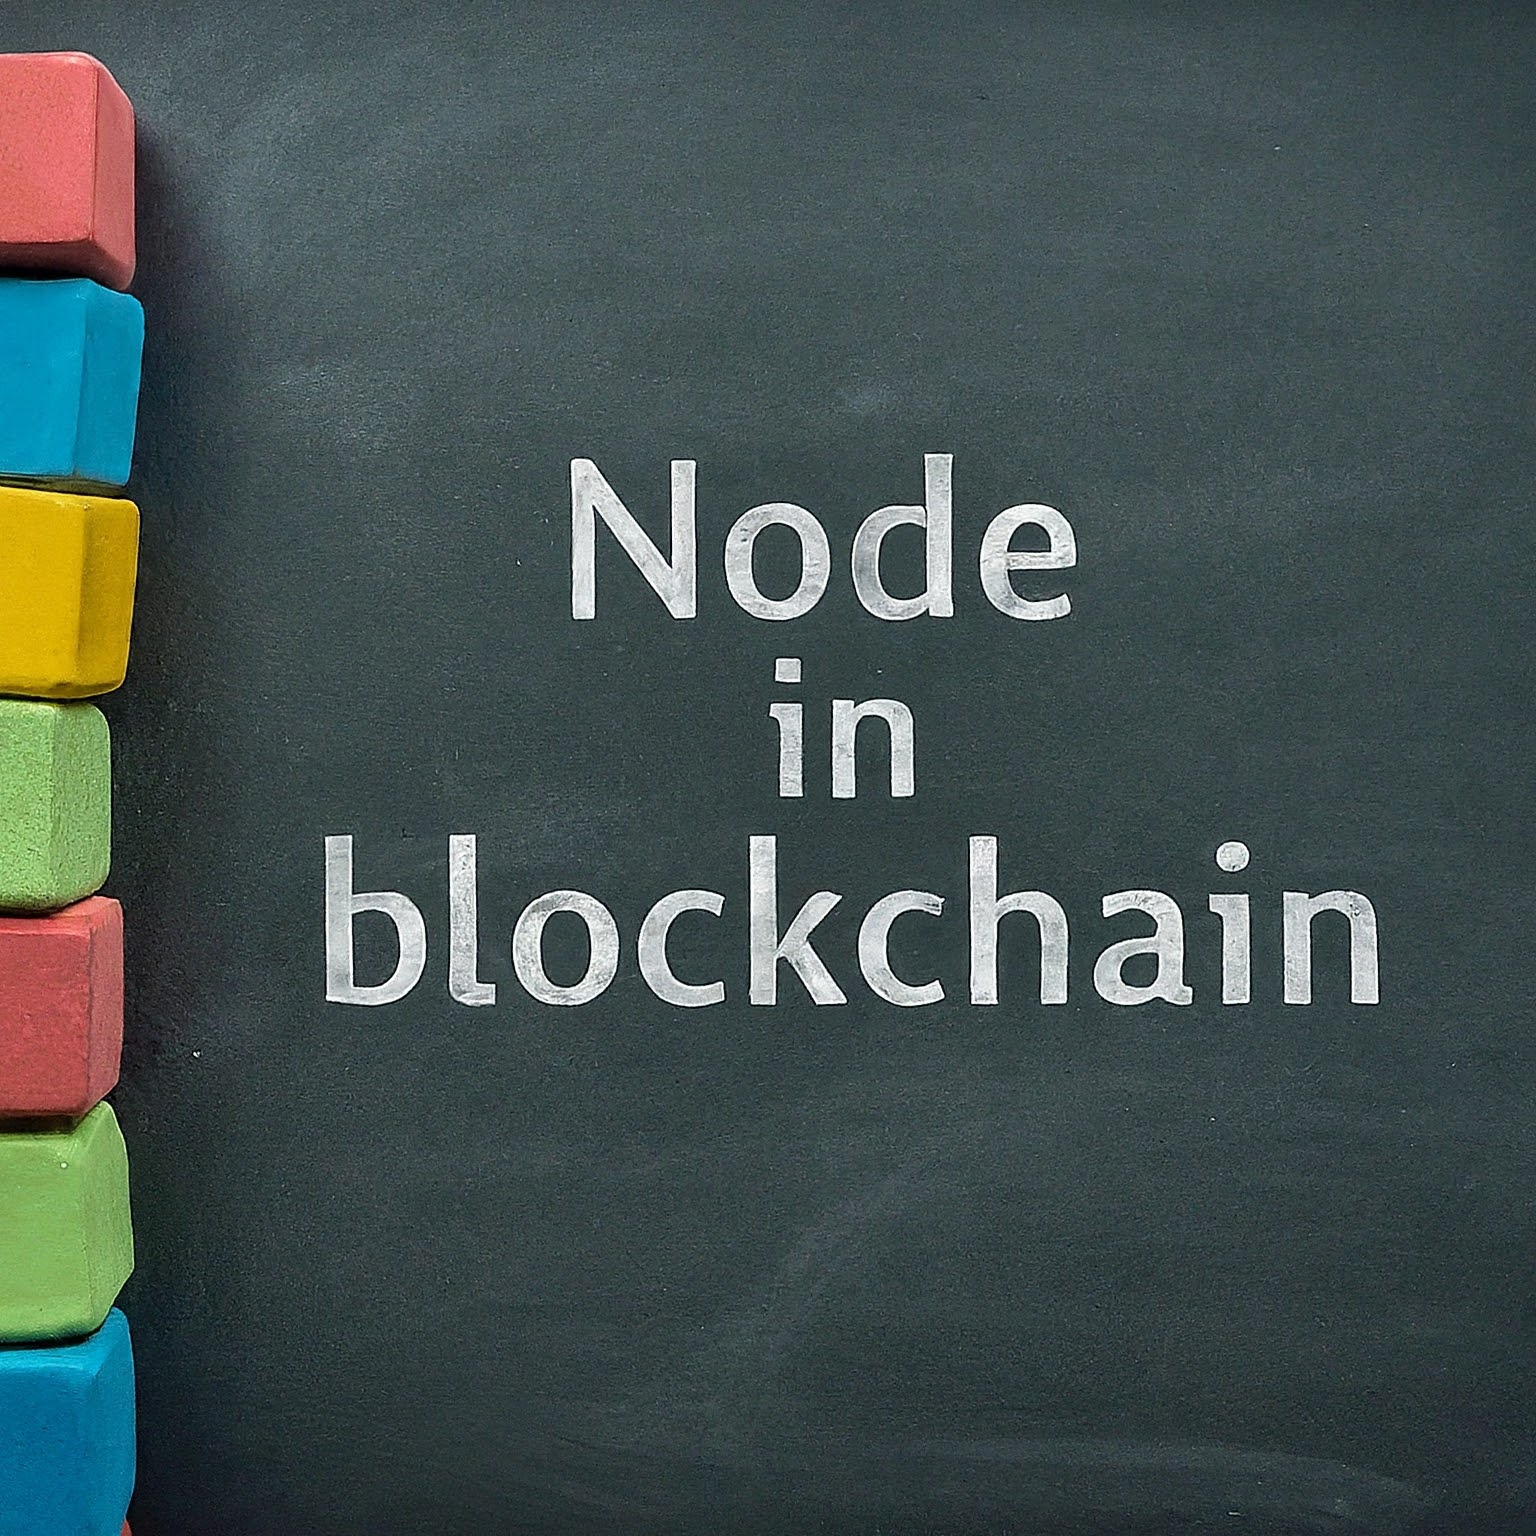 What is a Node in Blockchain?